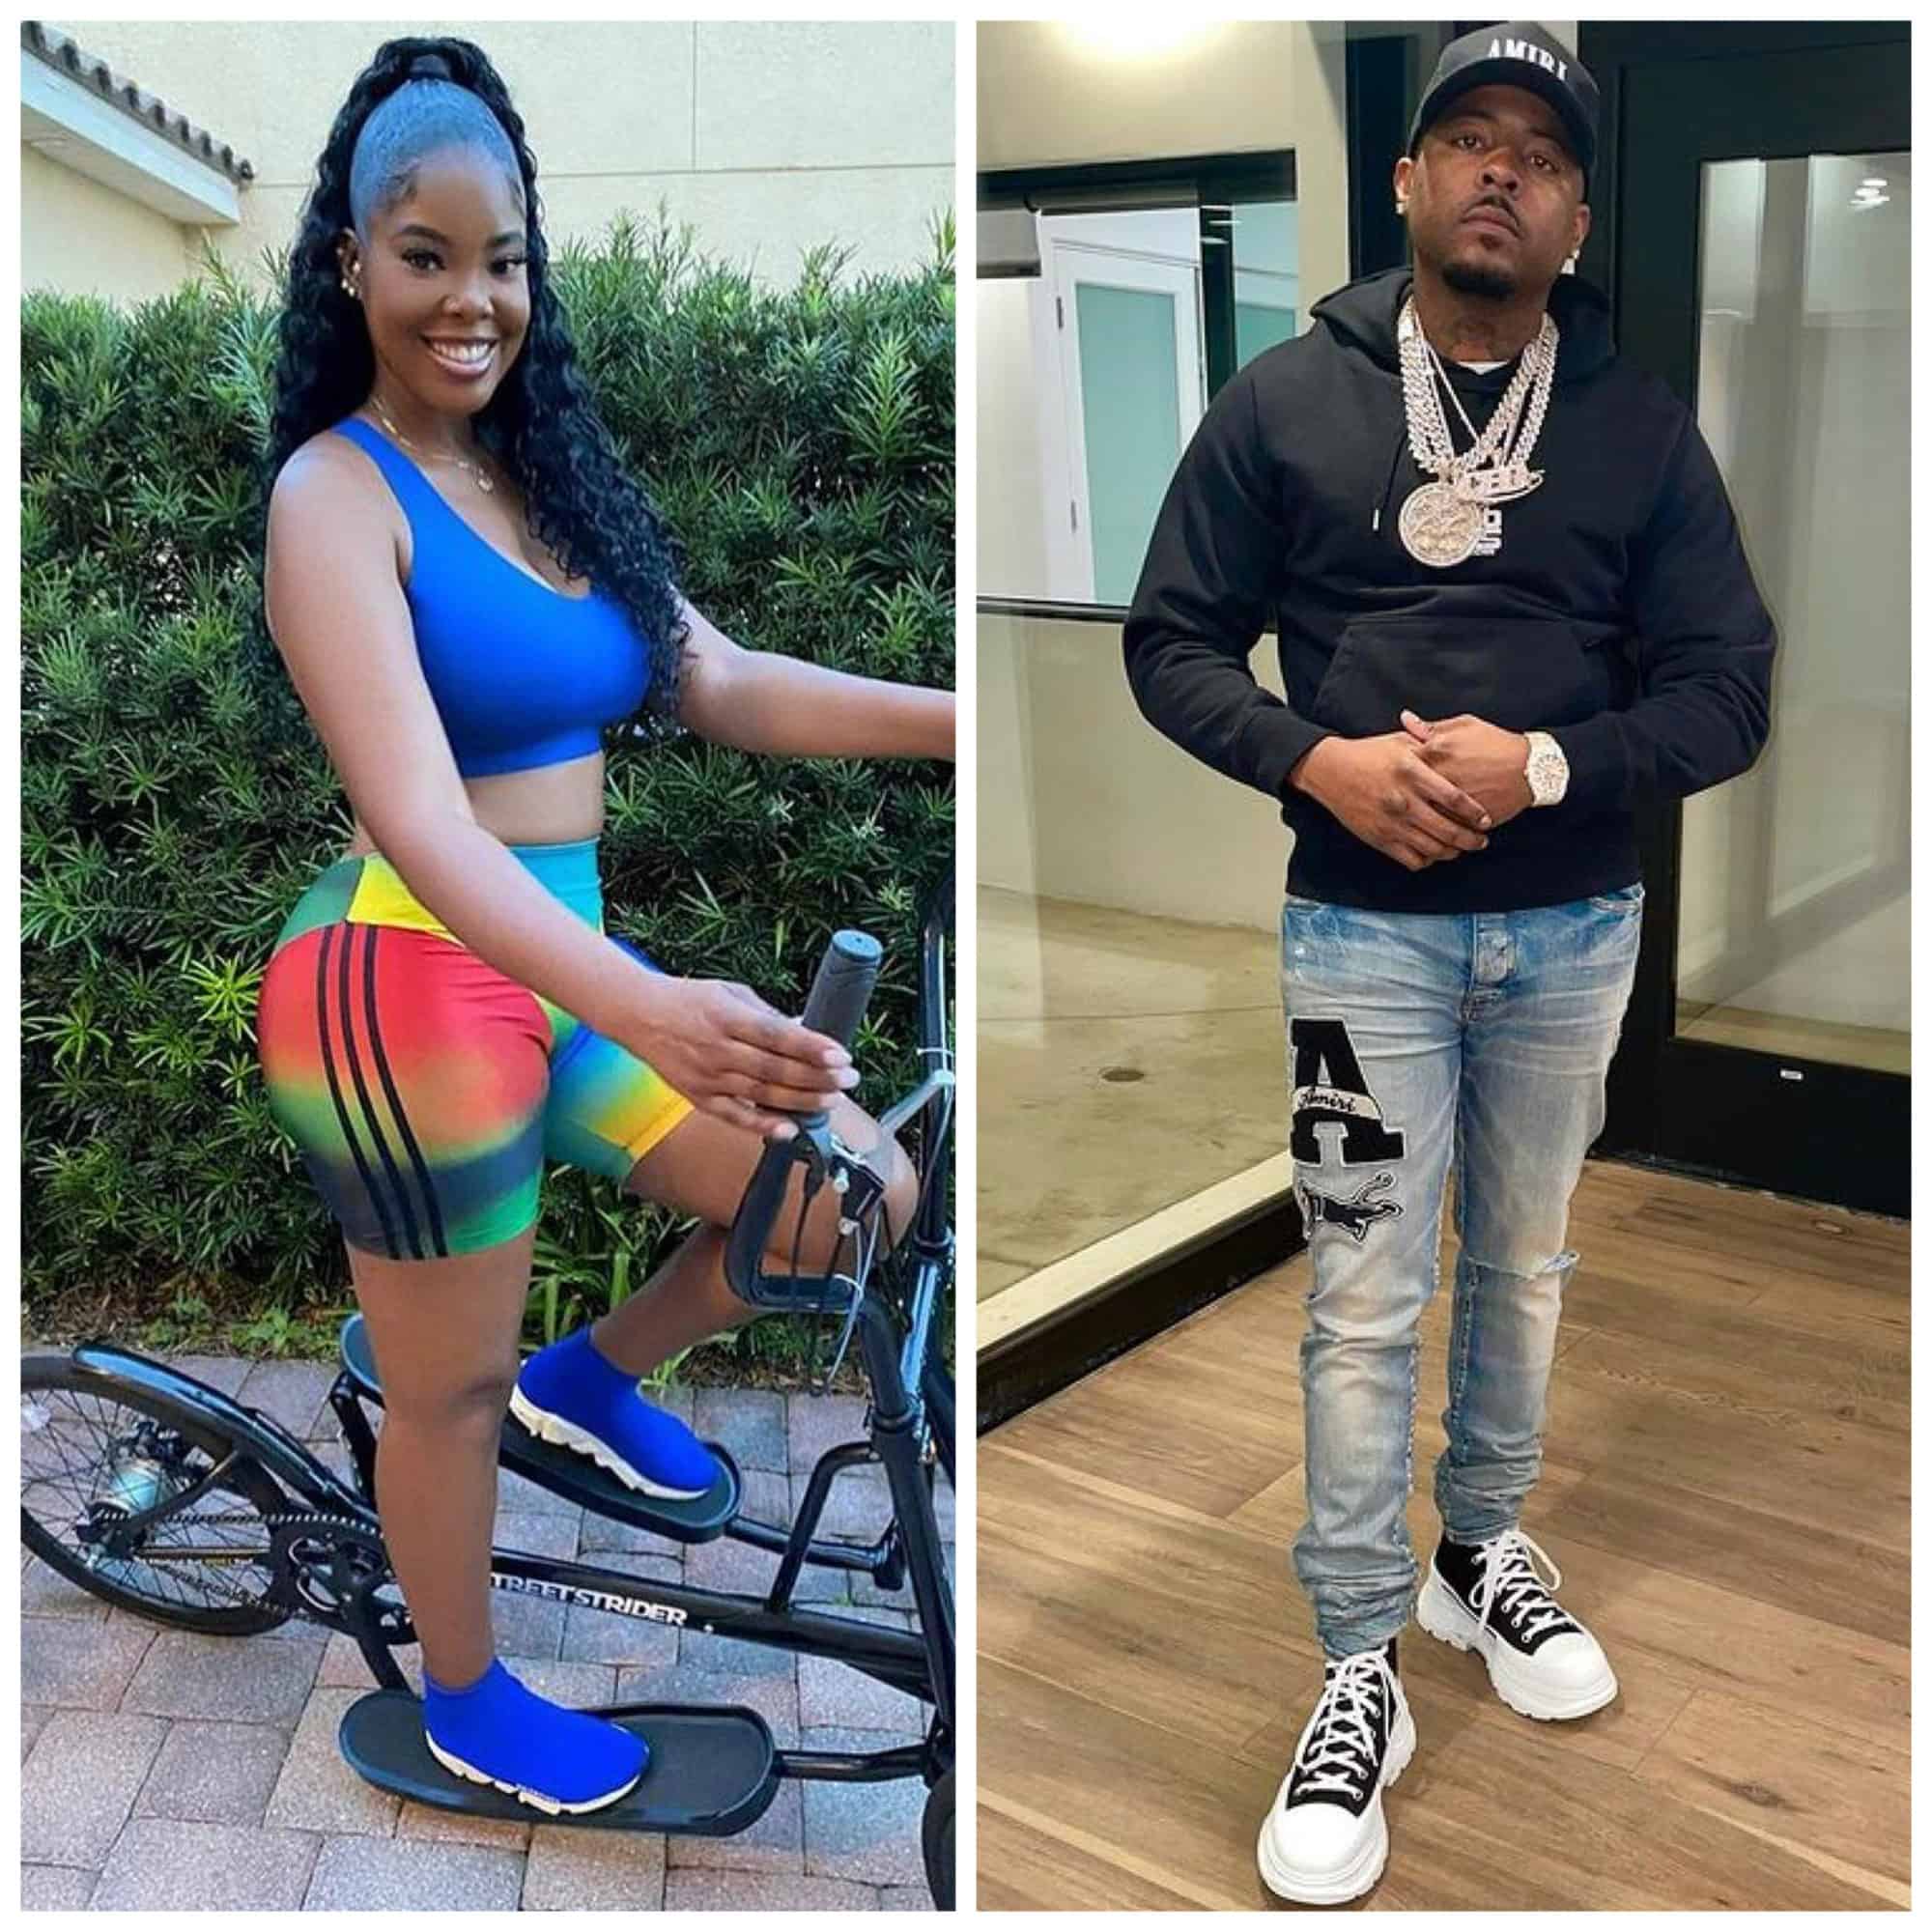 "Love & Hip Hop" star Juju Castaneda has tied the knot with a mystery man in Vegas. She's known for being the ex-girlfriend of Dipset rapper Cam'Ron.